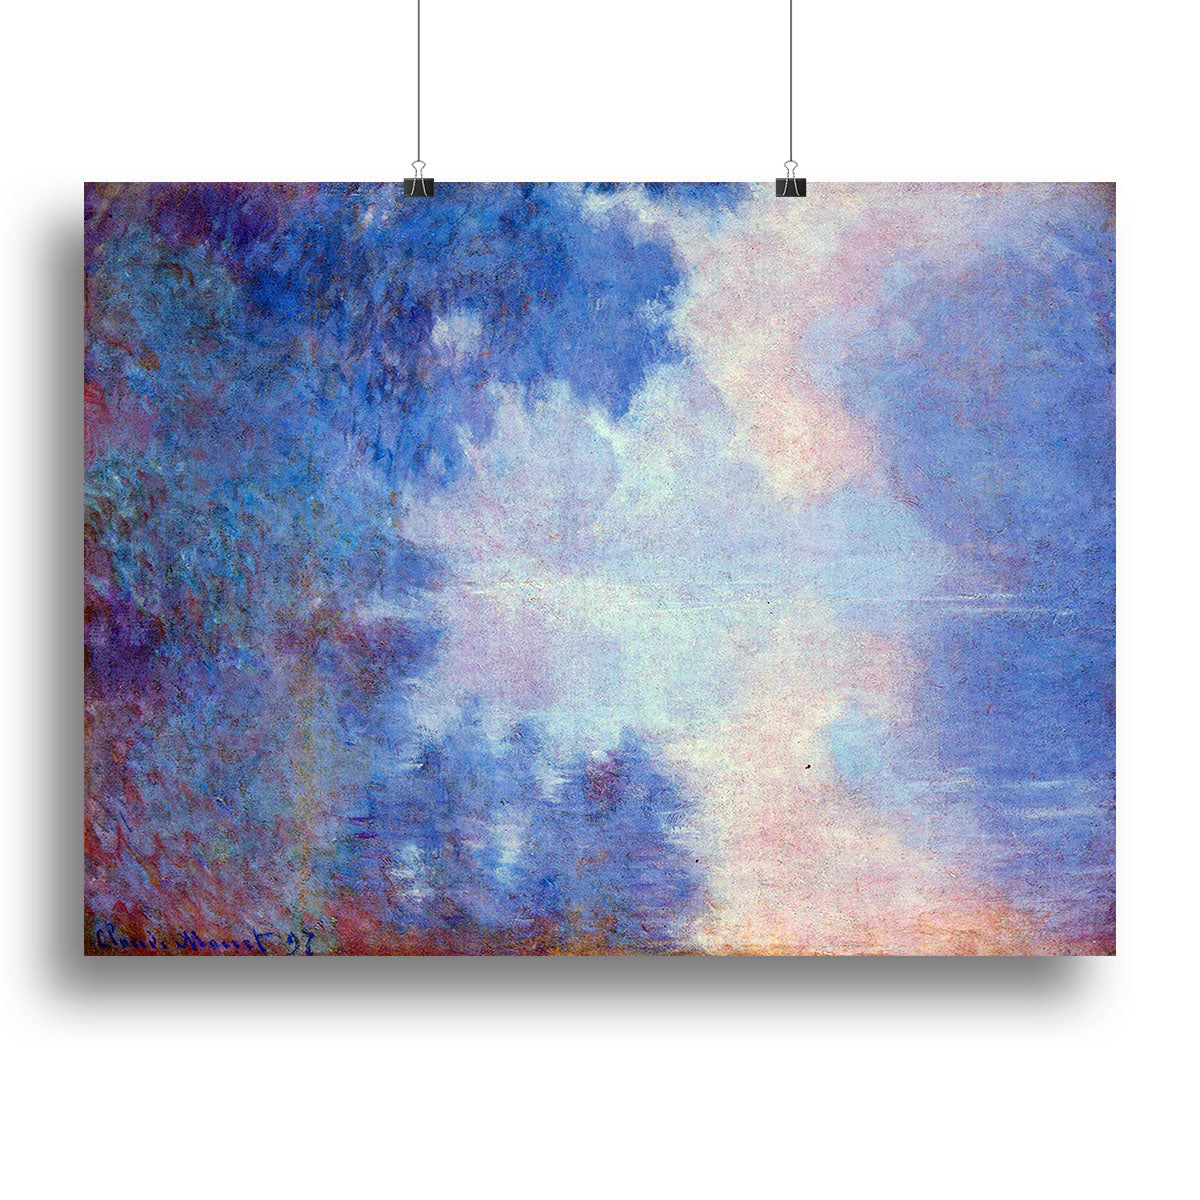 Seine in Morning by Monet Canvas Print or Poster - Canvas Art Rocks - 2